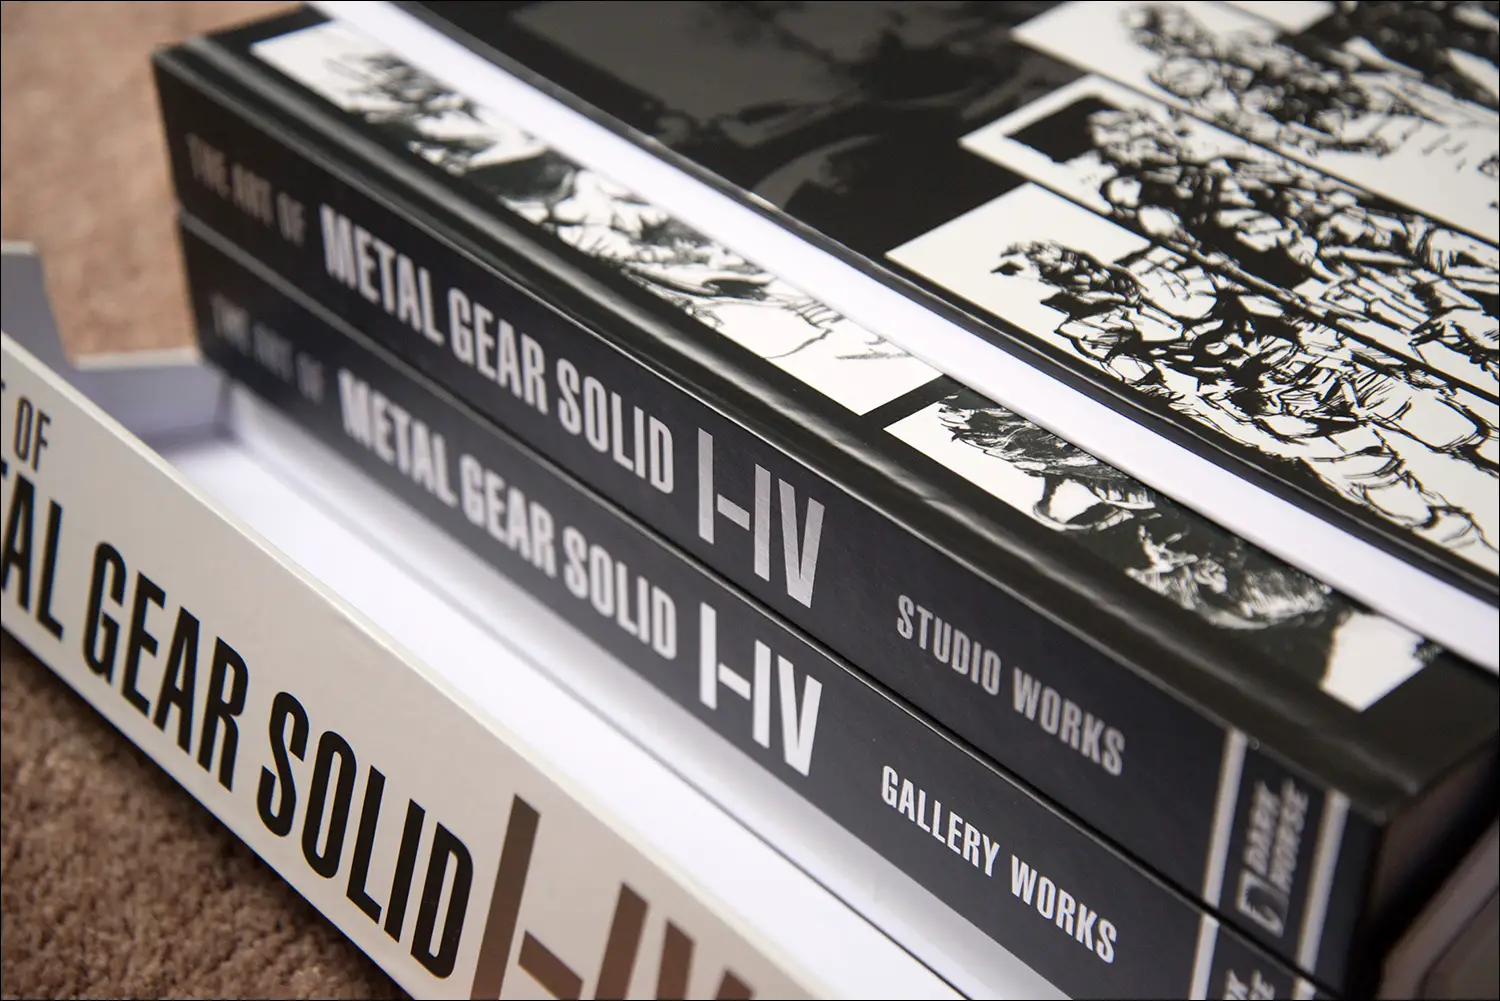 Close Up: The Art of Metal Gear Solid I - IV - Metal Gear Informer